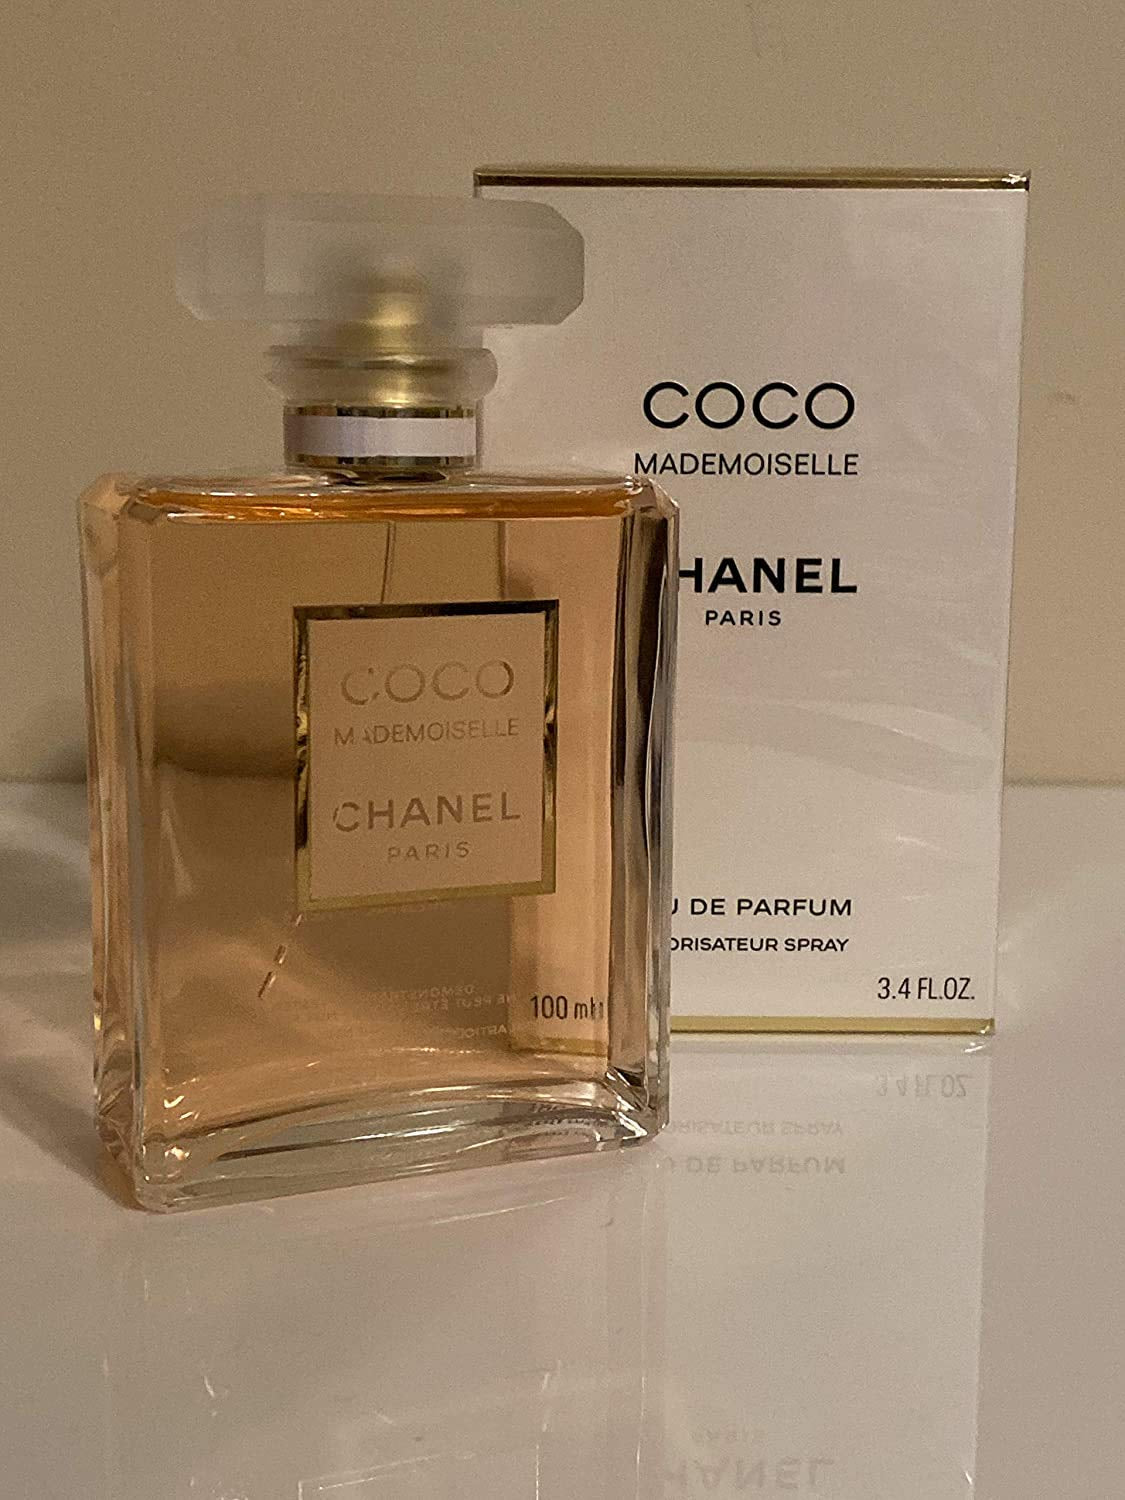 Chanel Coco Mademoiselle Coffret: Eau De Parfum Spray 50ml/1.7oz + Purse  Spray with 3 Refills 4x7.5ml 5pcs buy in United States with free shipping  CosmoStore